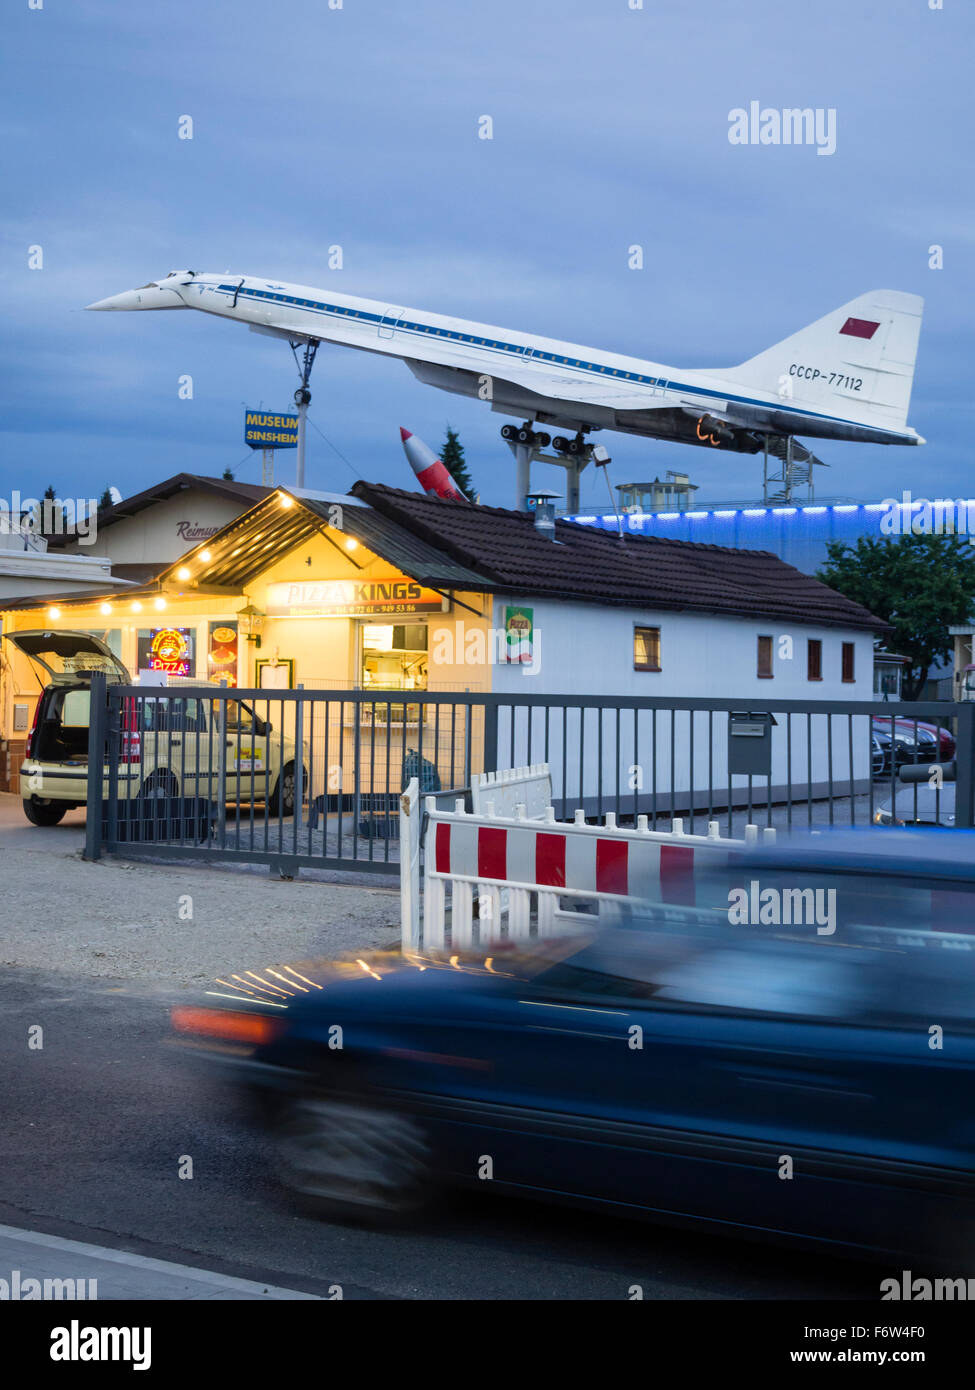 A discarded Russian Tupolev Tu-144 supersonic passenger aircraft on display at the rooftop of a museum in Sinsheim, Germany. Stock Photo